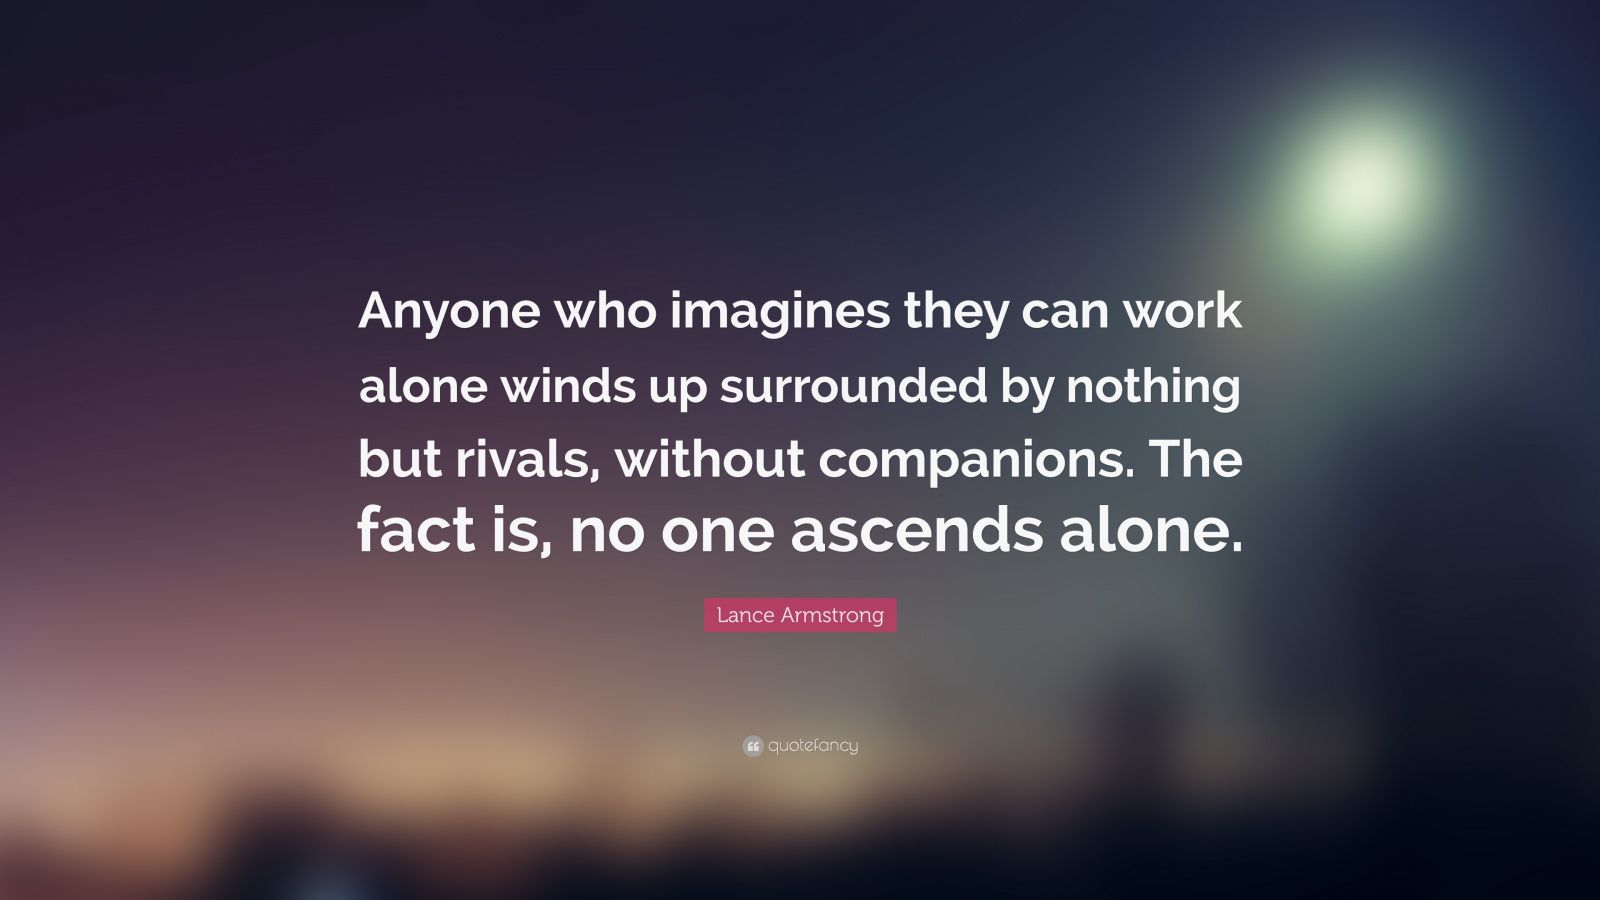 lance armstrong quote: "anyone who imagines they can work alone